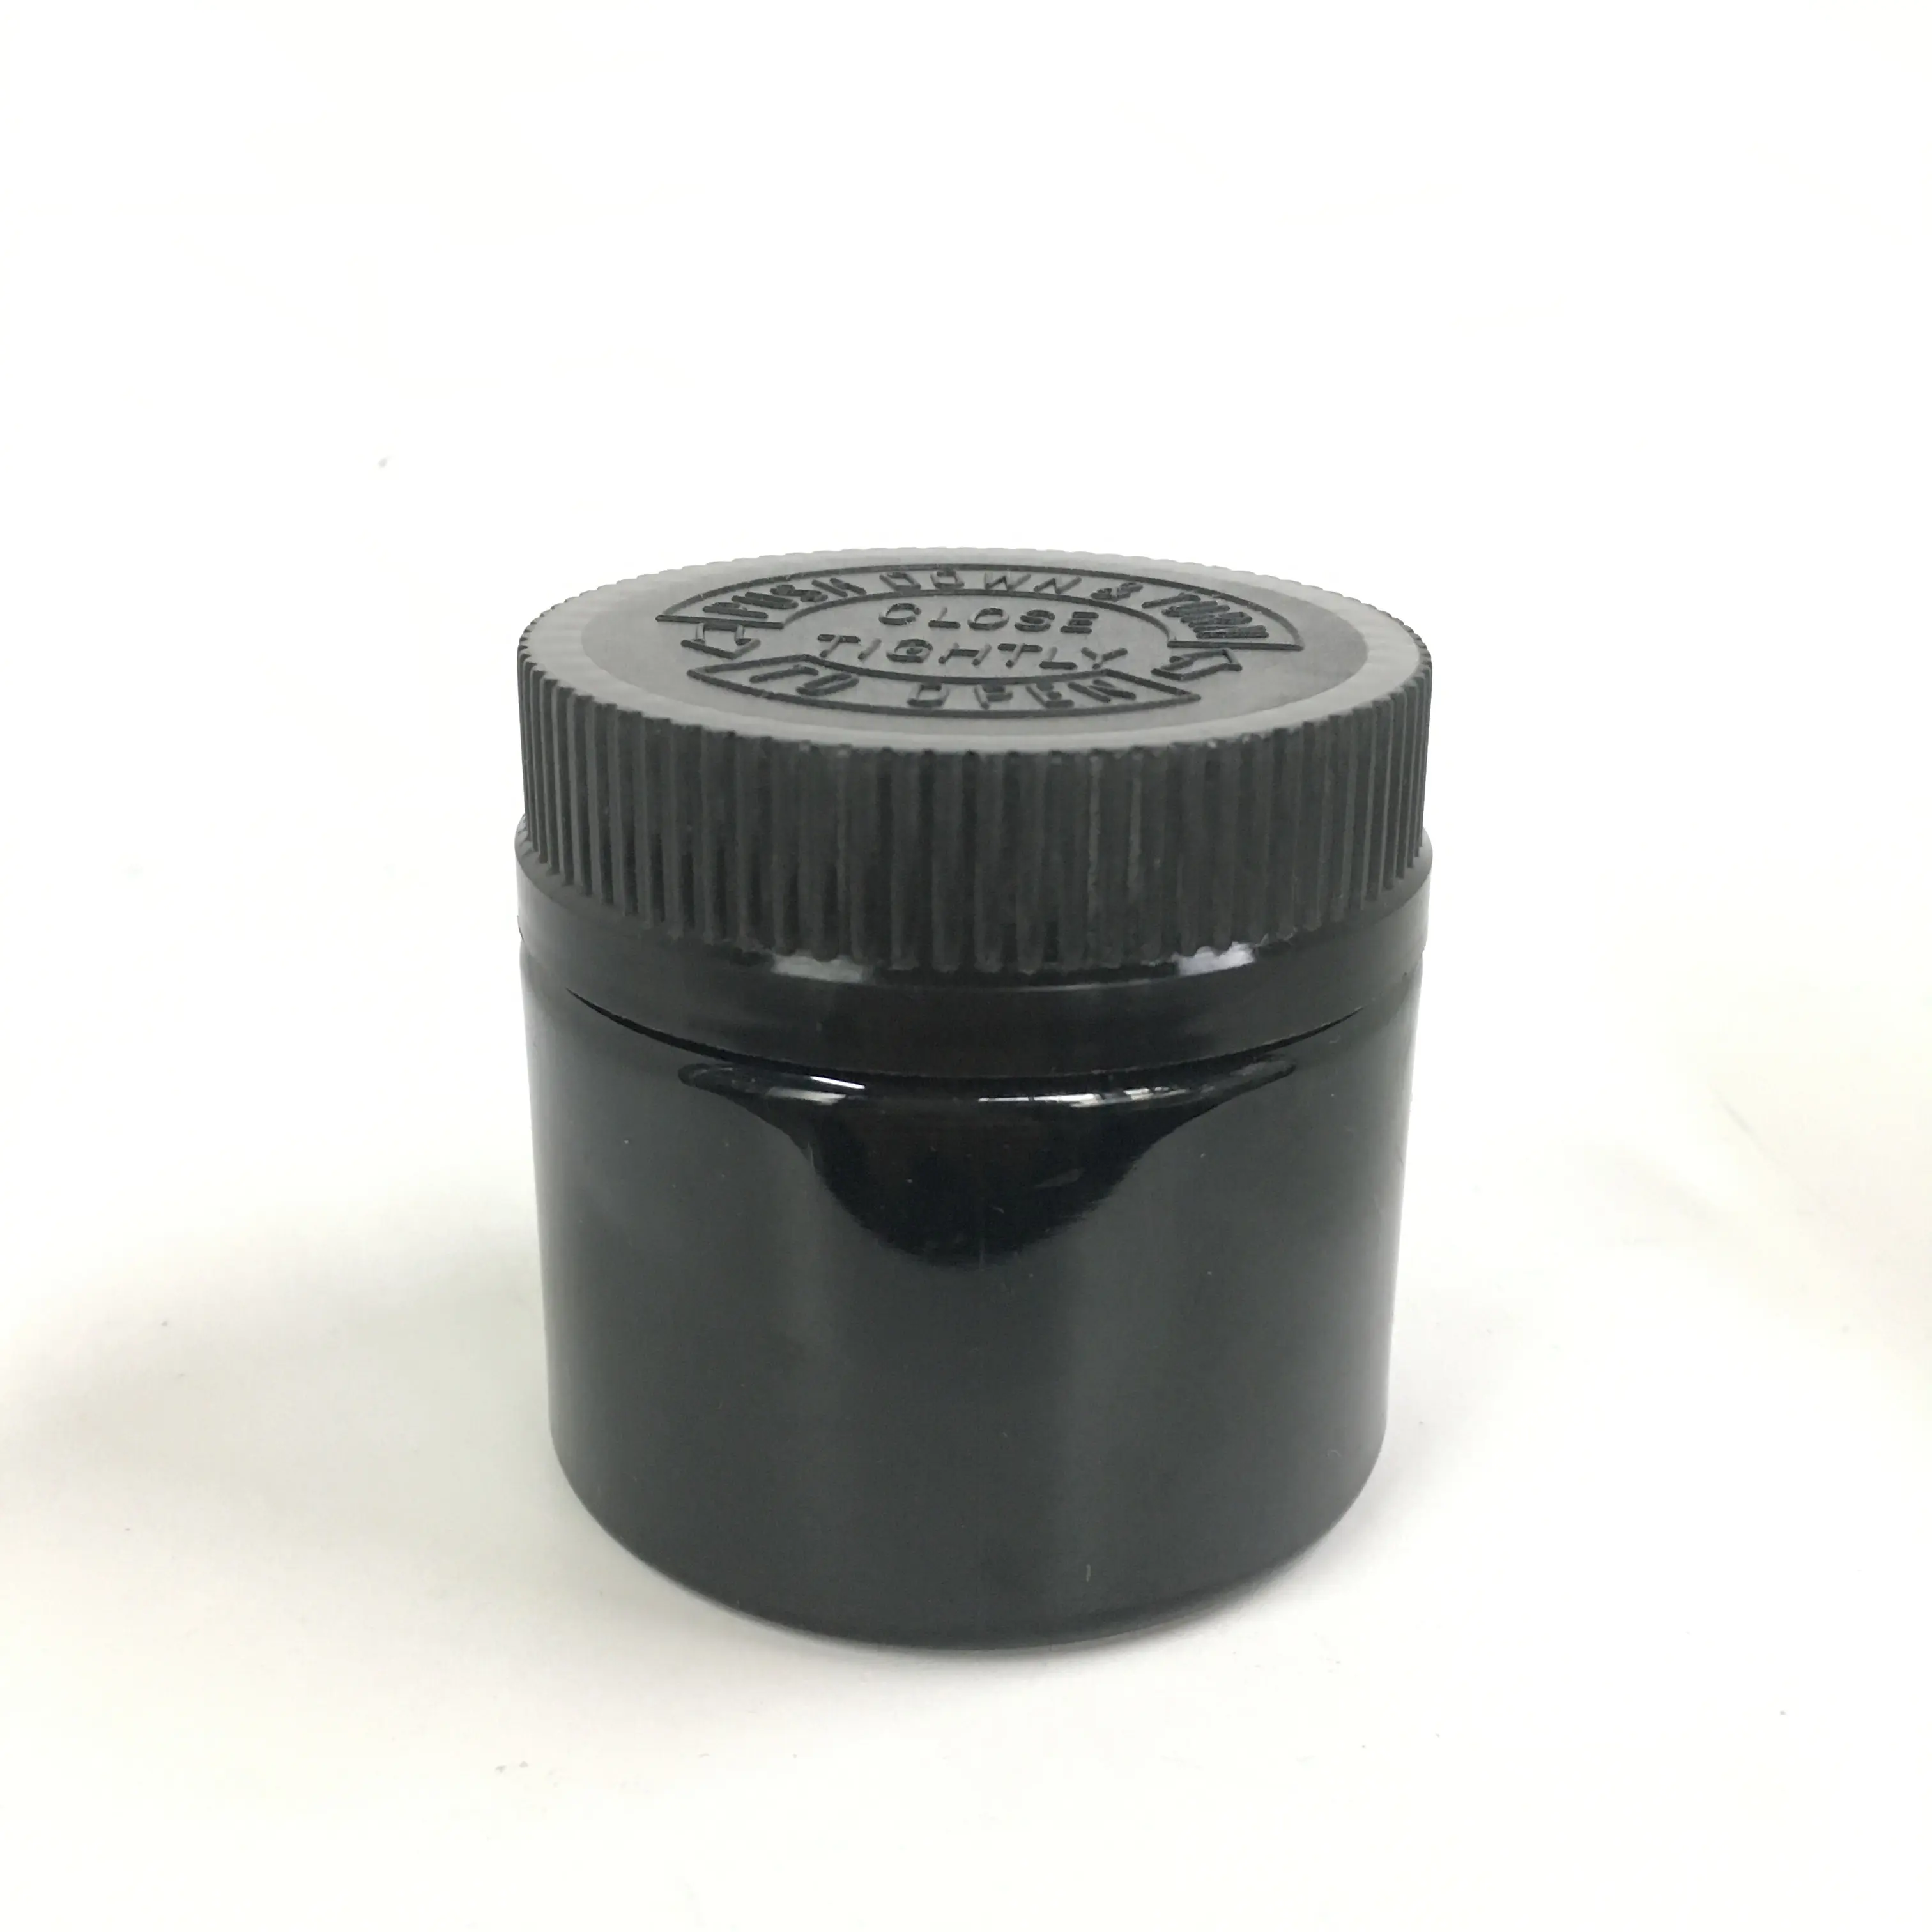 53mm PP Plastic Child Proof Safety Resistant Cap Security Pressure Screw Childproof Cap for oil plastic bottle